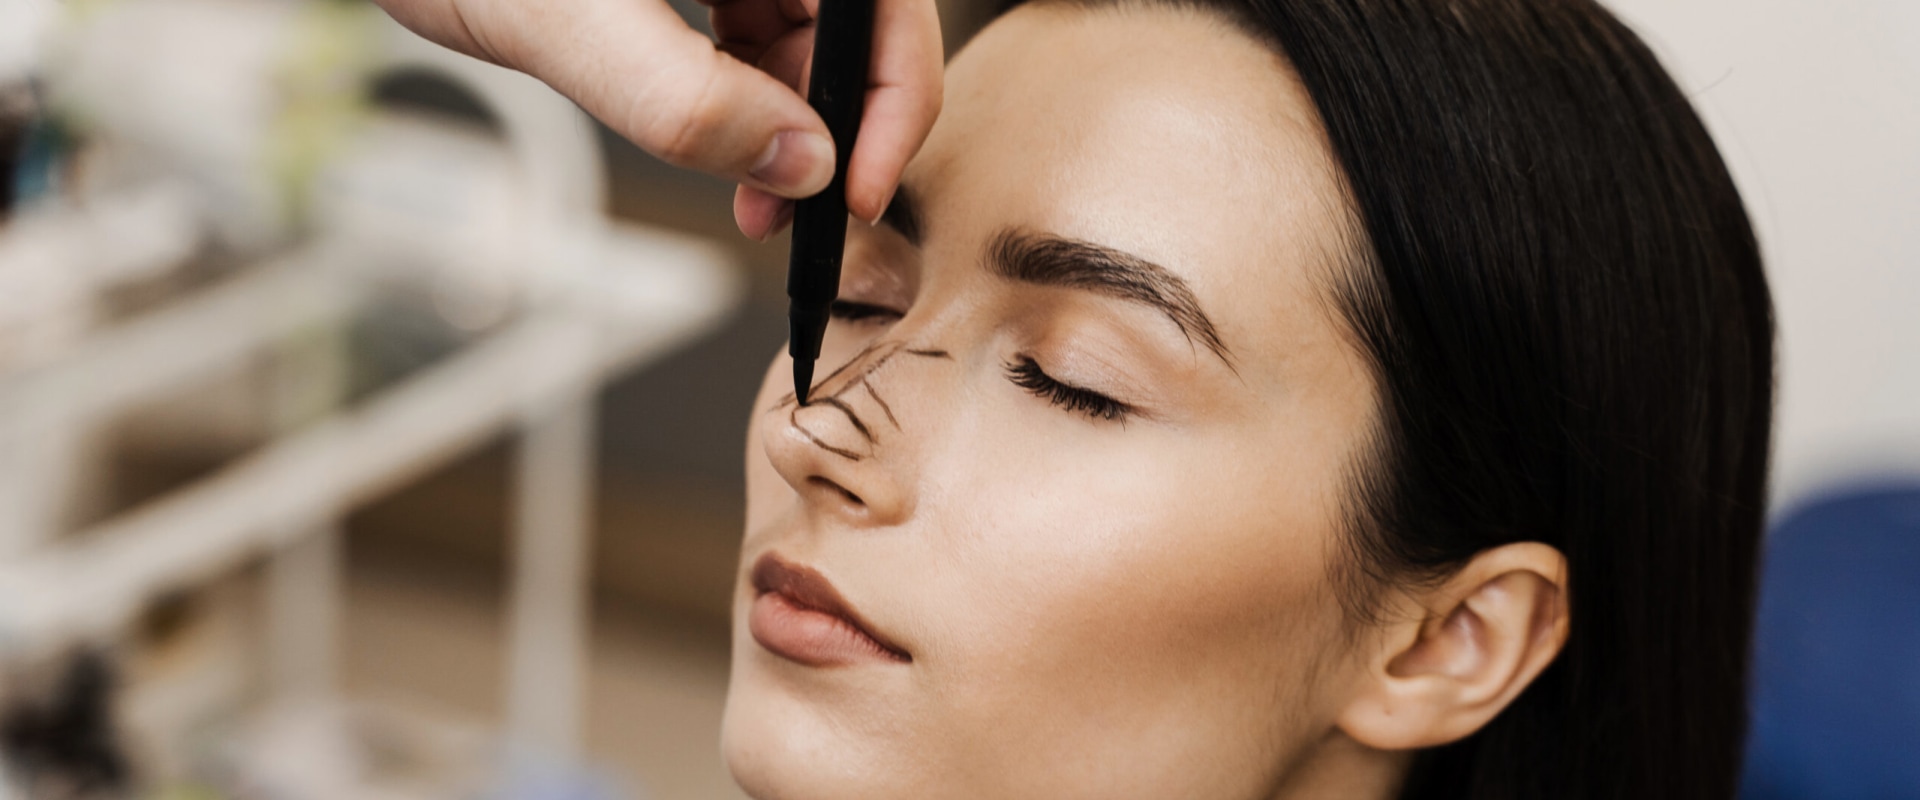 The True Cost of a Straight Nose: What You Need to Know About Rhinoplasty Prices